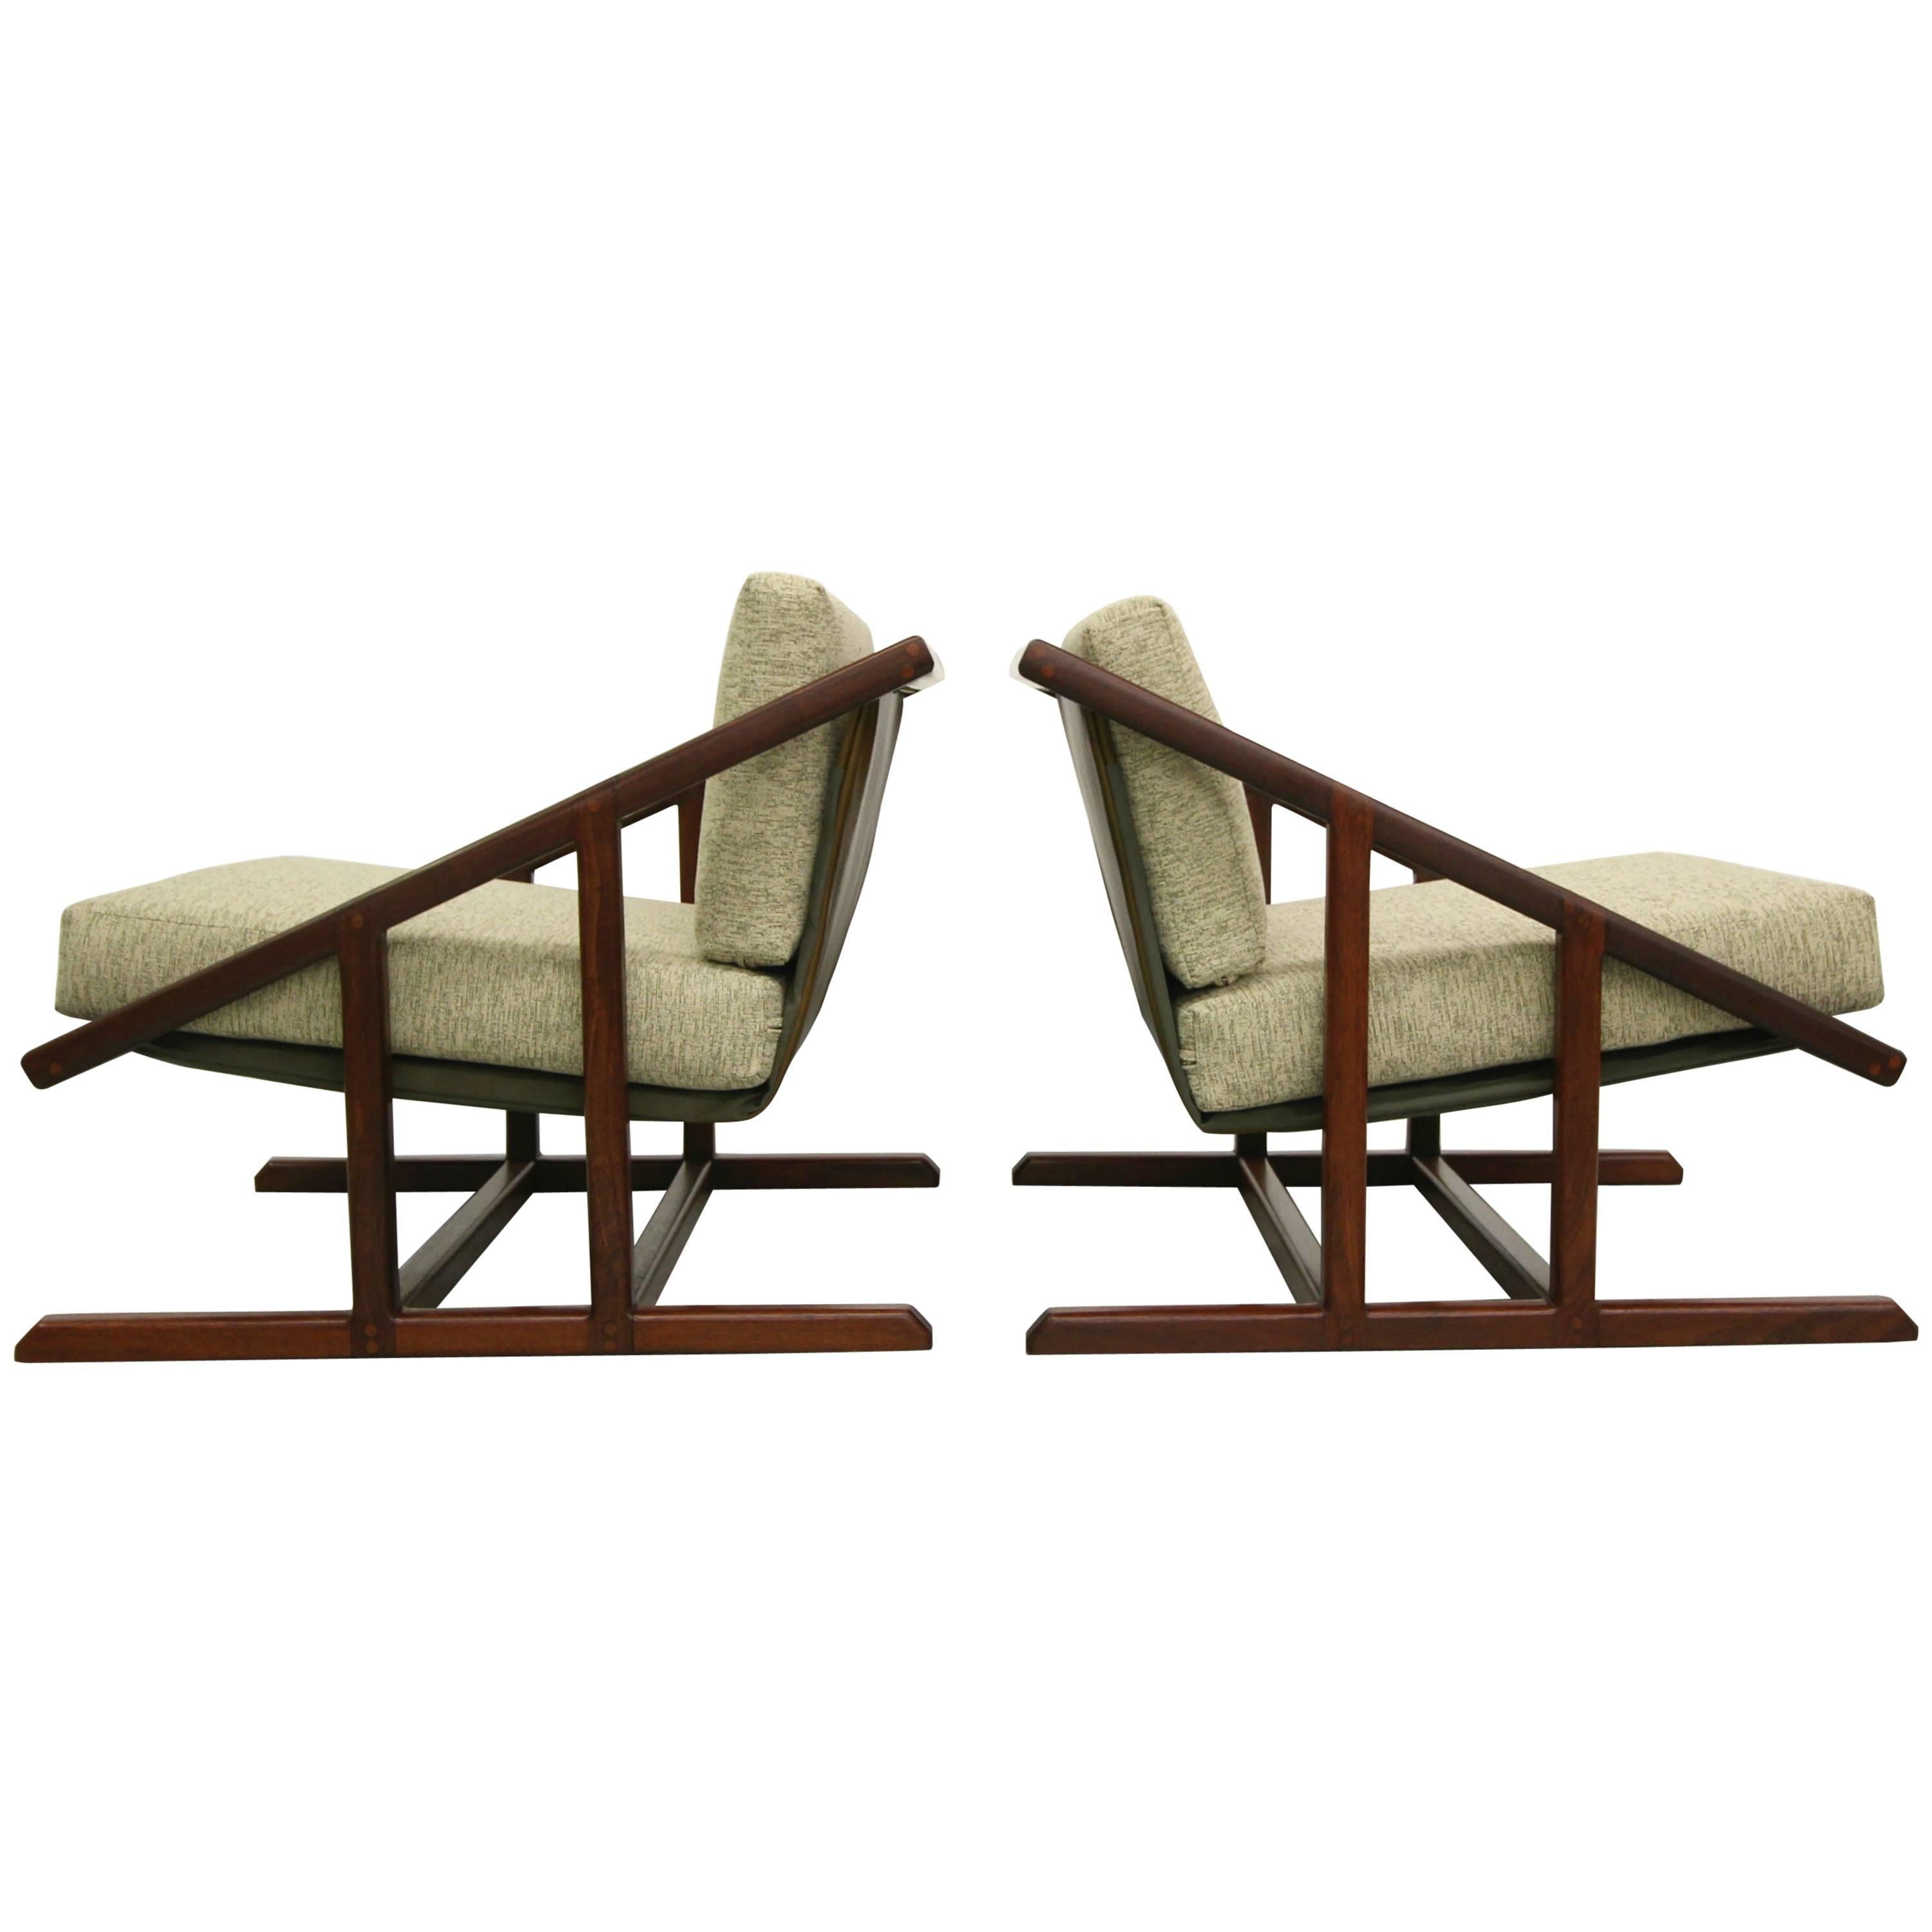 Super rare pair of angular, solid walnut sling chairs. These chairs are like no others. The lines created by their solid walnut frames create two masterpieces. These chairs feature a leather sling that supports the cushioned seating. If you're